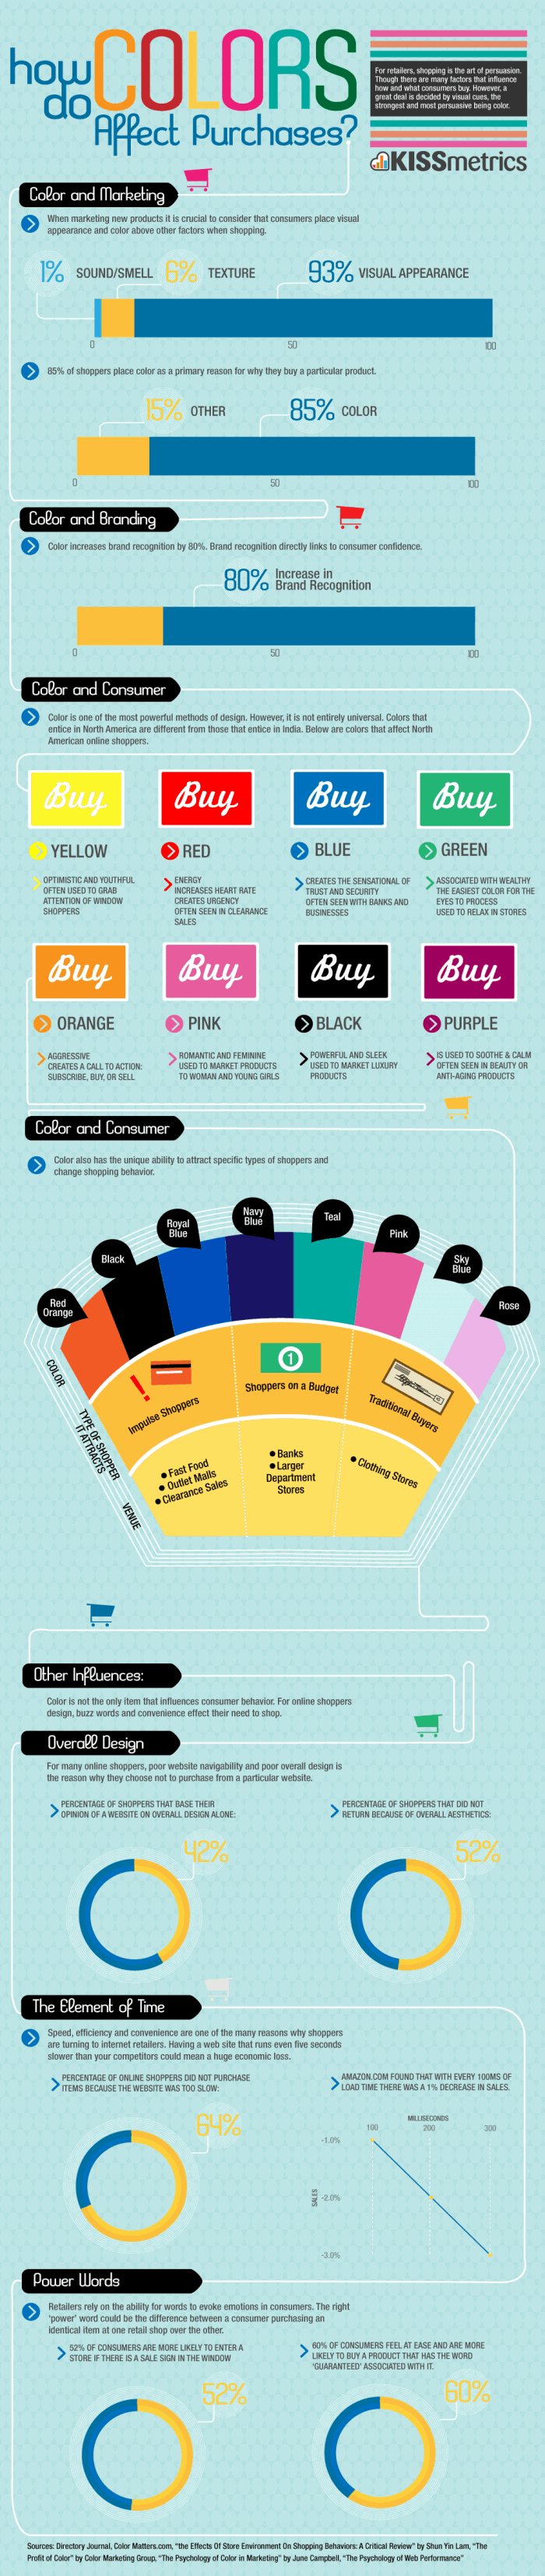 How Color Affects Our Purchases Infographic